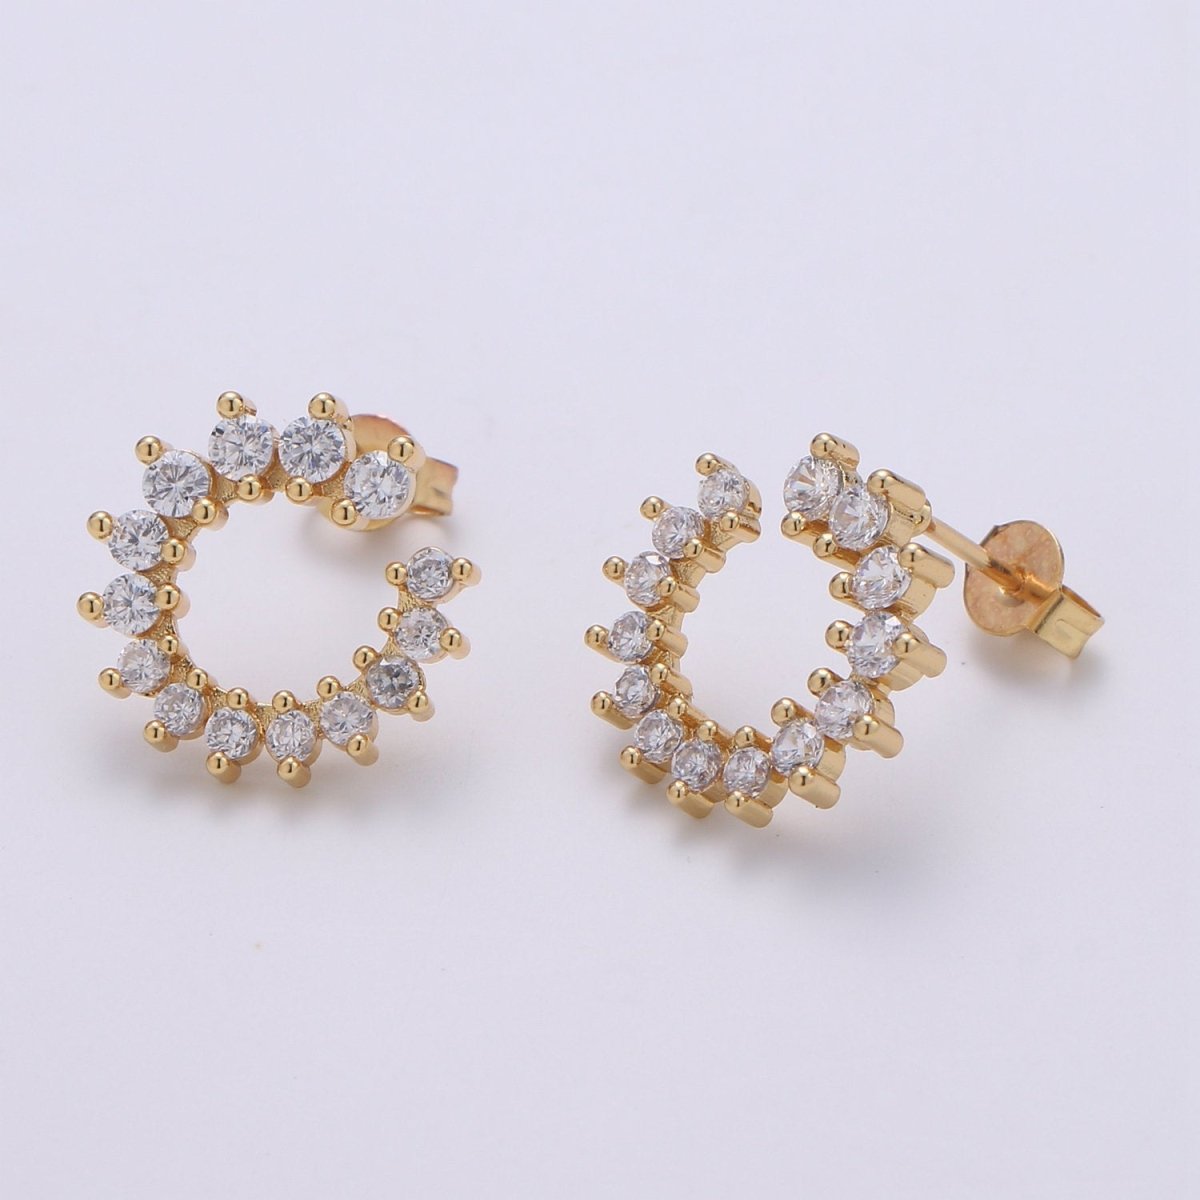 Dainty Gold Cz Cluster Stud Earrings, Clear Micro Pave Stud, Gold Clear Stud, Gold Earring Minimalist Geometric Design for Christmas gift Q-249 - DLUXCA